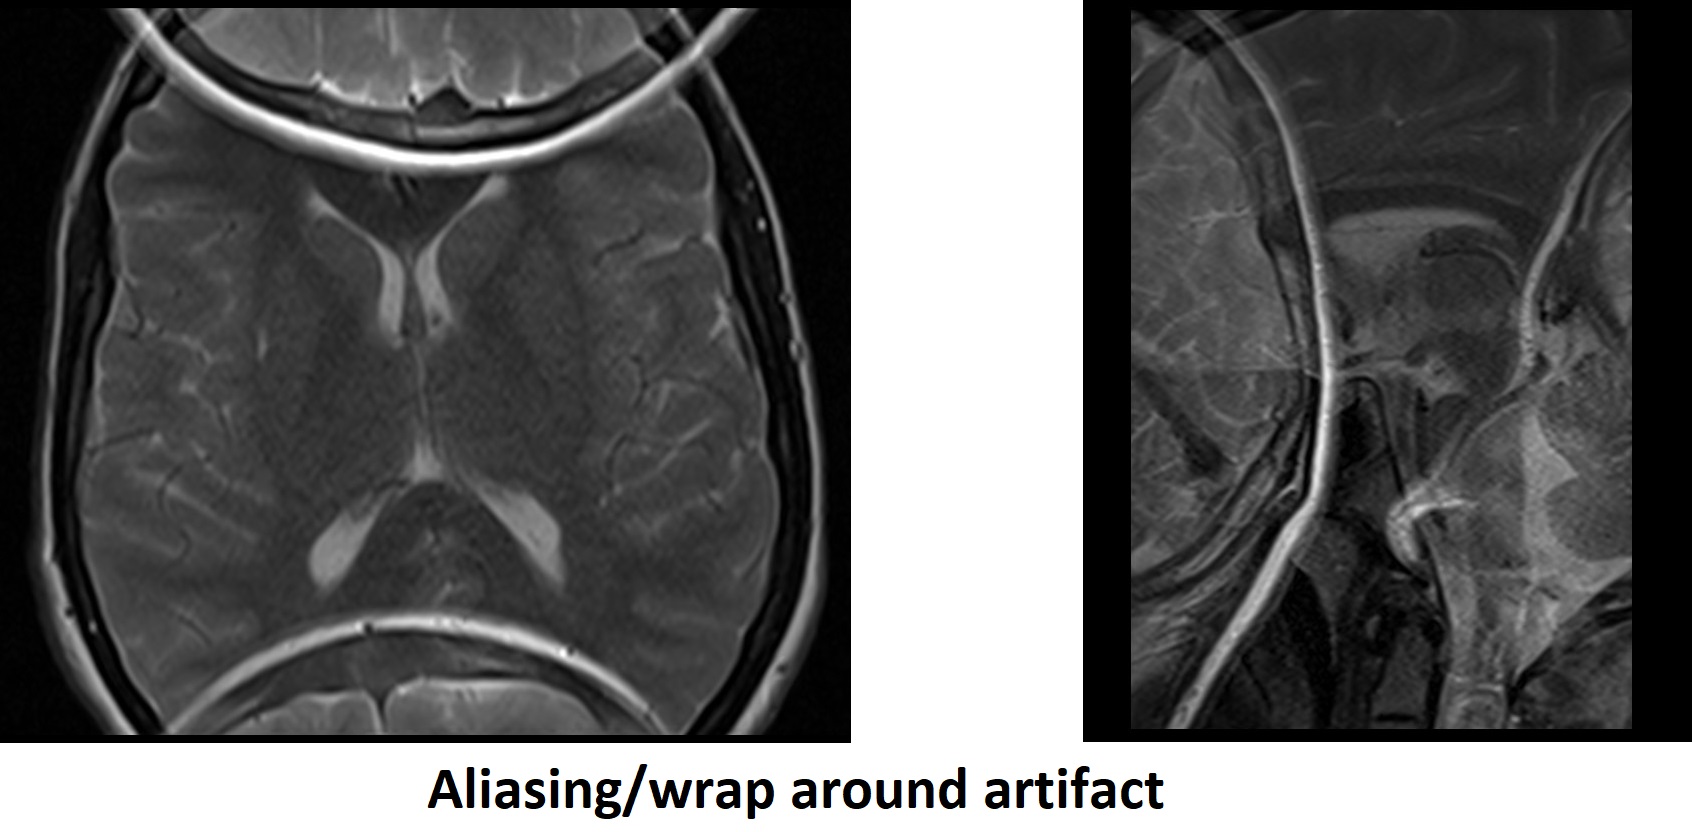 Frequency wrap-around - Questions and Answers ​in MRI